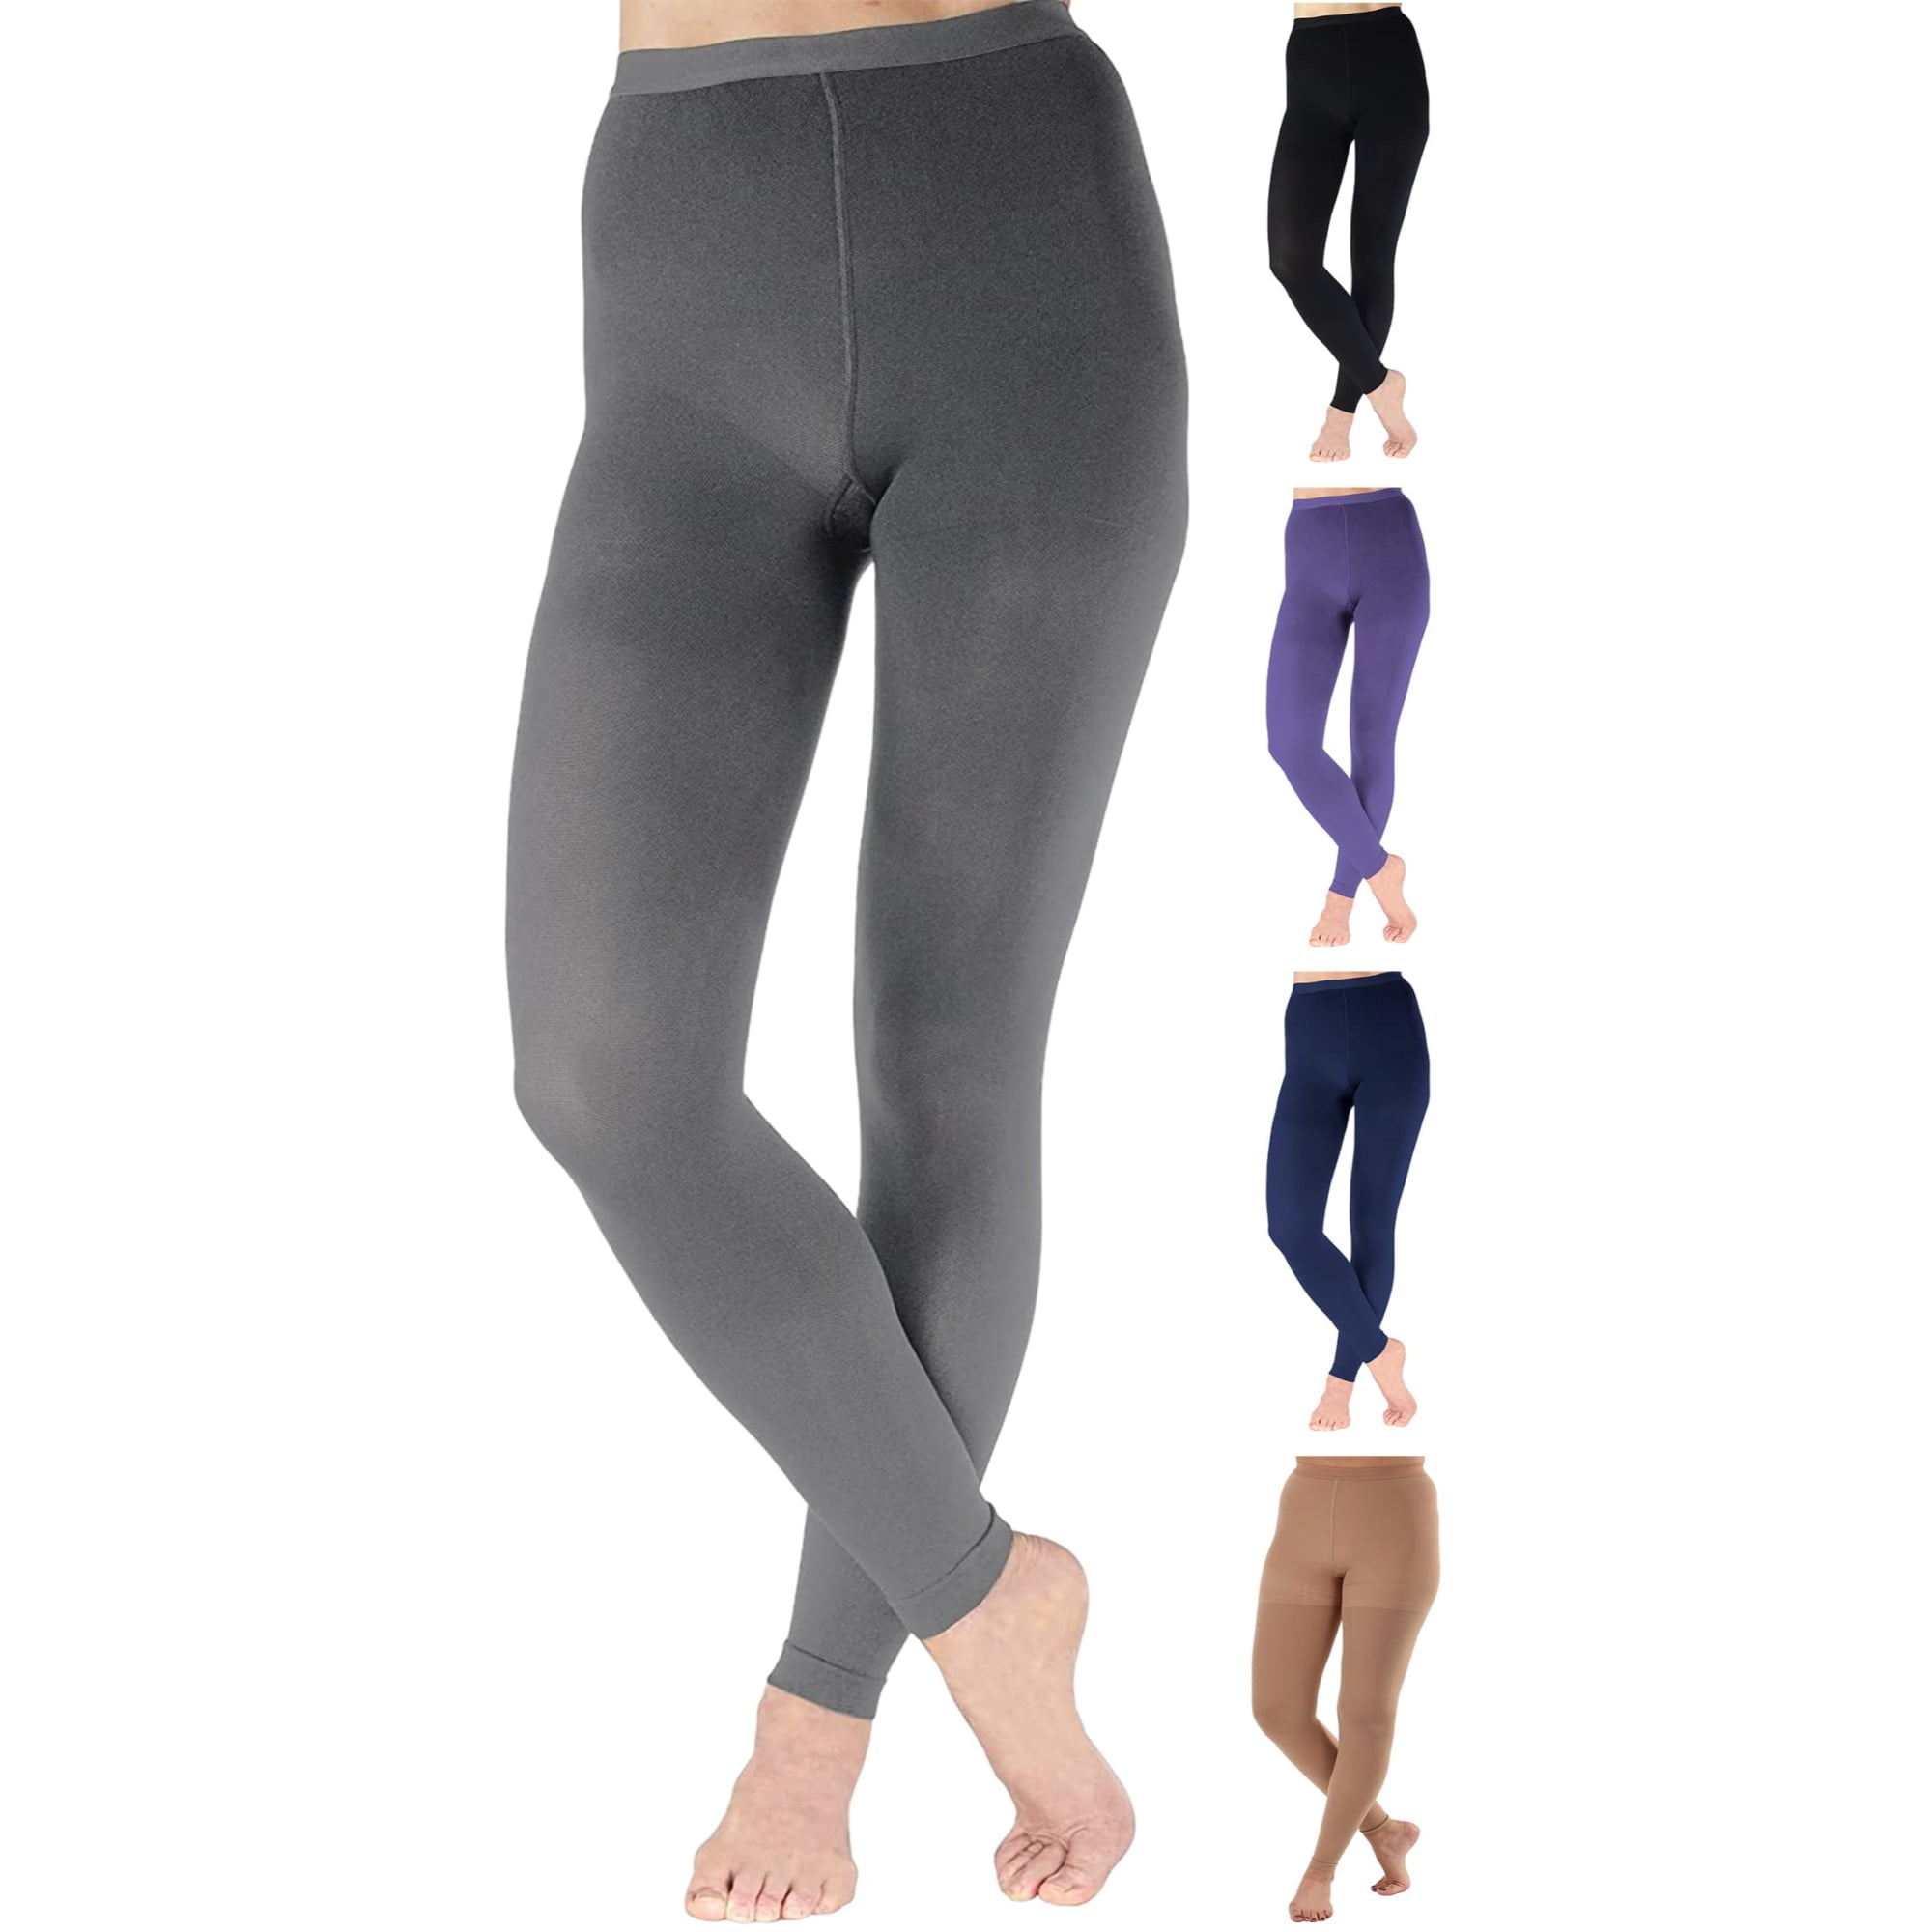 Footless Compression Tights for Women Circulation 20-30mmHg - Grey, Large 